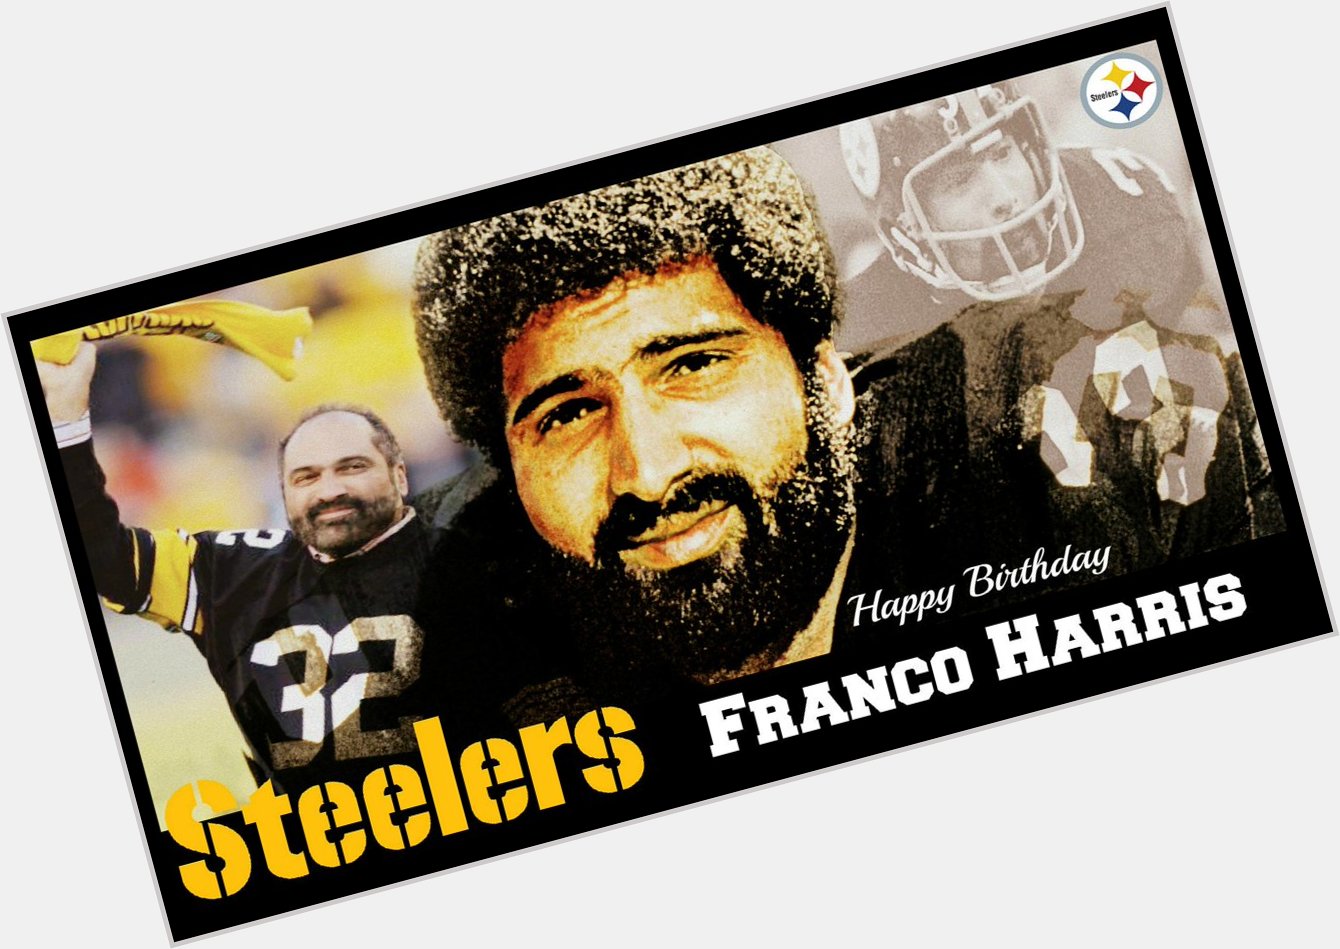 Wishing Steelers 4× Super Bowl Champion, Hall of Famer, Franco Harris a Happy BDay!  